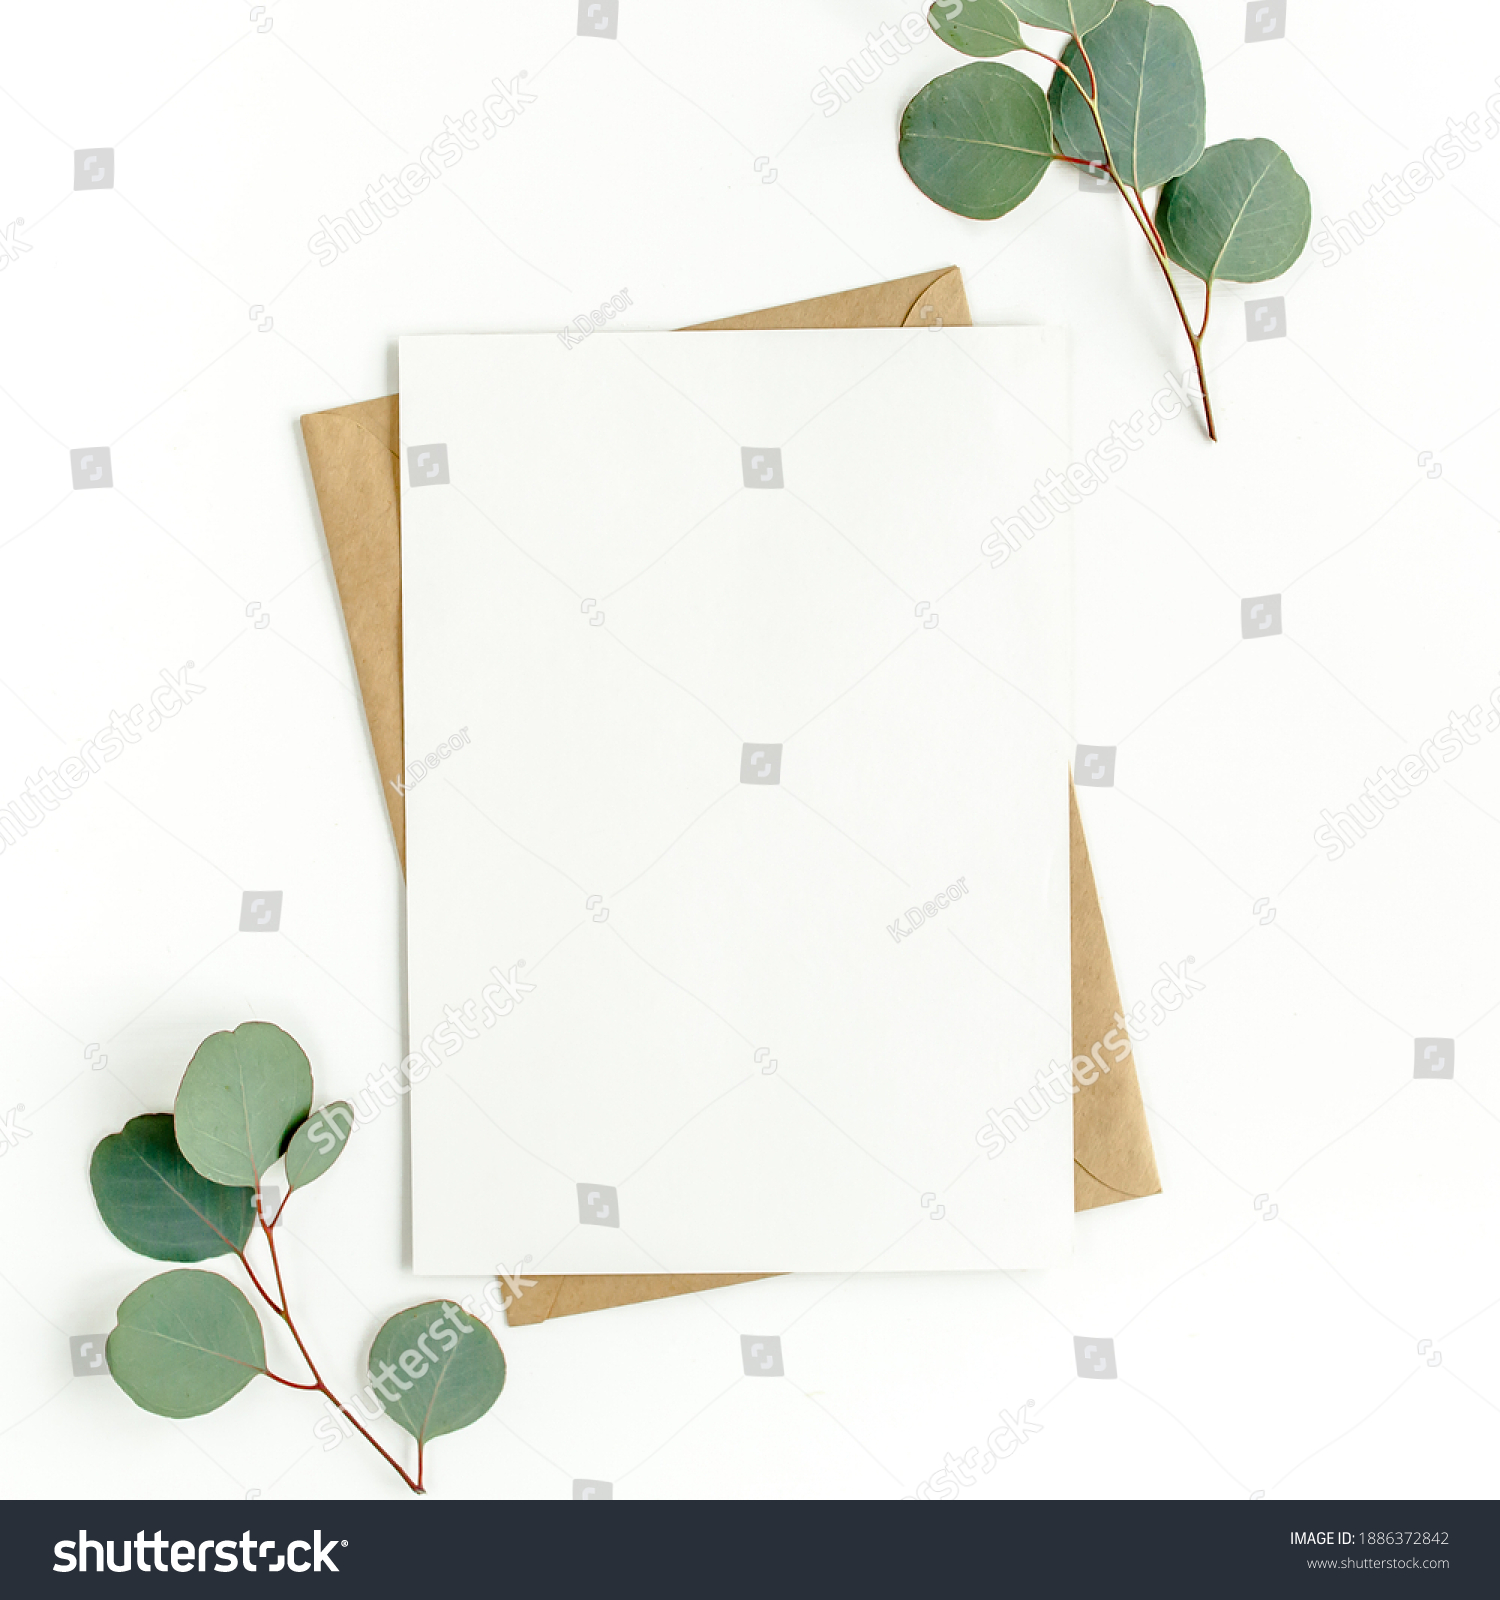 Mockup invitation, blank greeting card and green leaves eucalyptus. Flat lay, top view. #1886372842